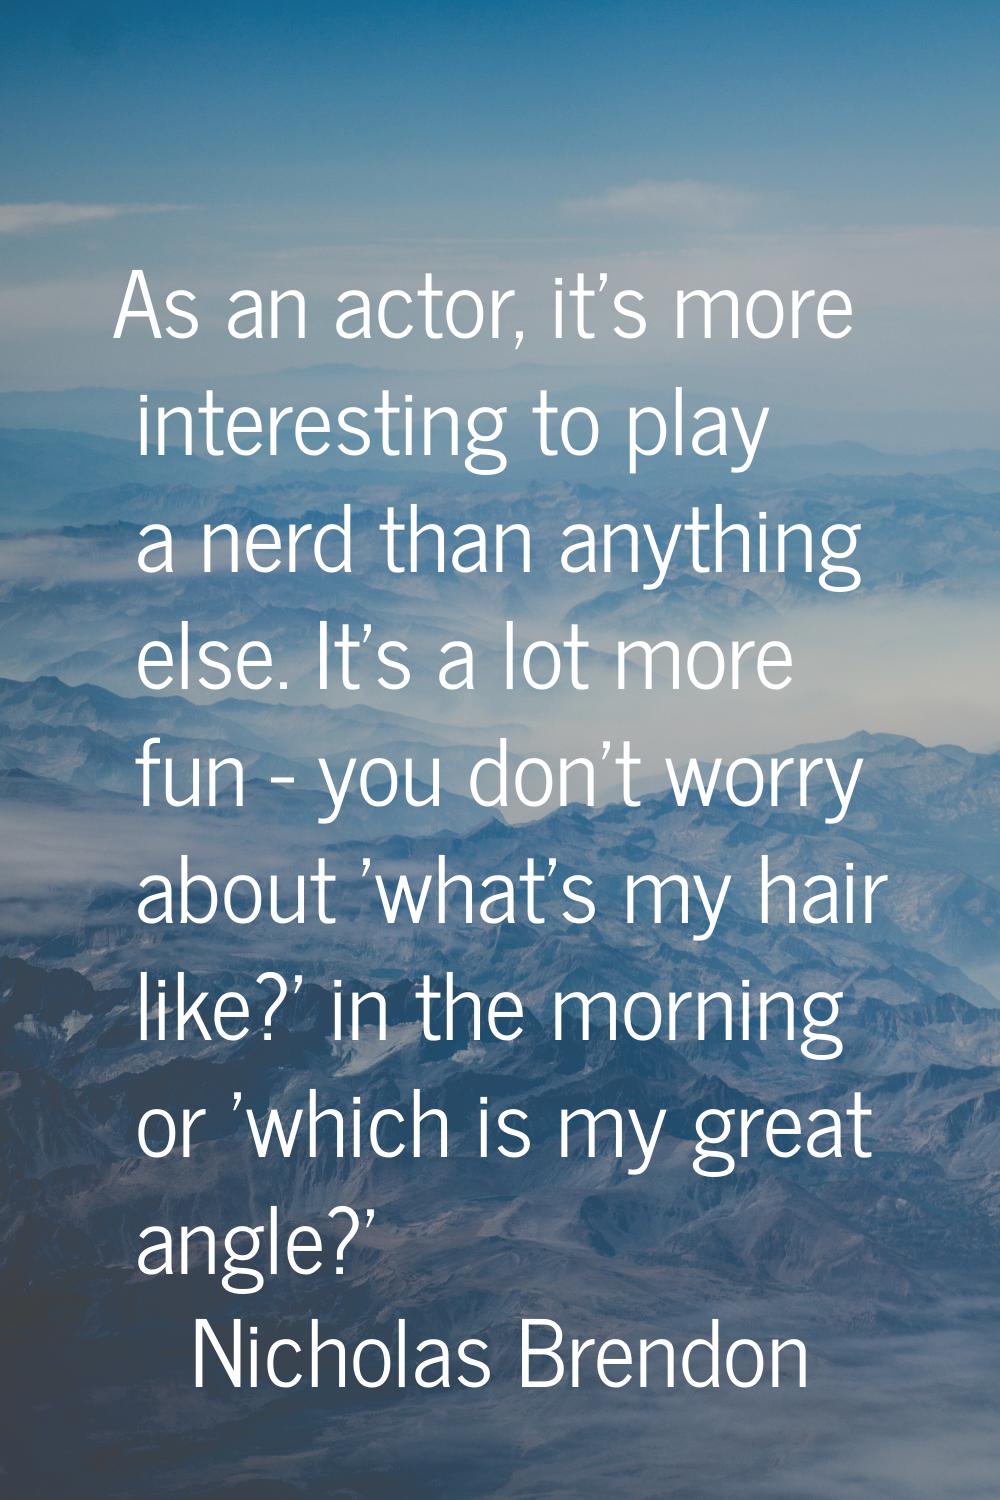 As an actor, it's more interesting to play a nerd than anything else. It's a lot more fun - you don